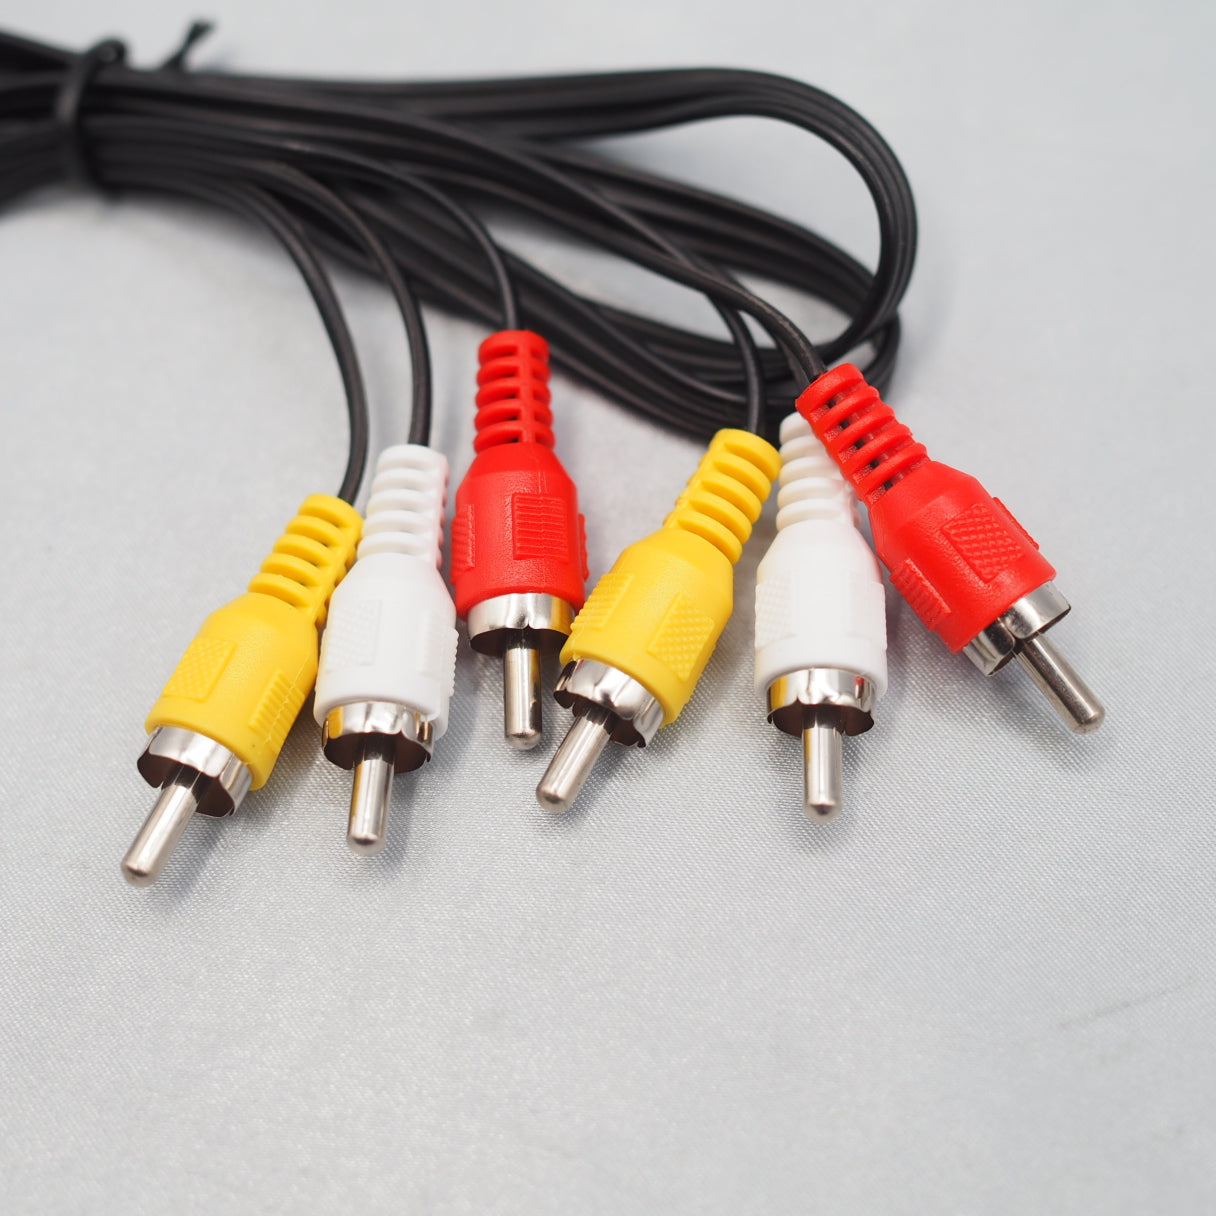 AV cable　3 to 3 RCA cable 3 colour 3 to 3 video cable 6 he